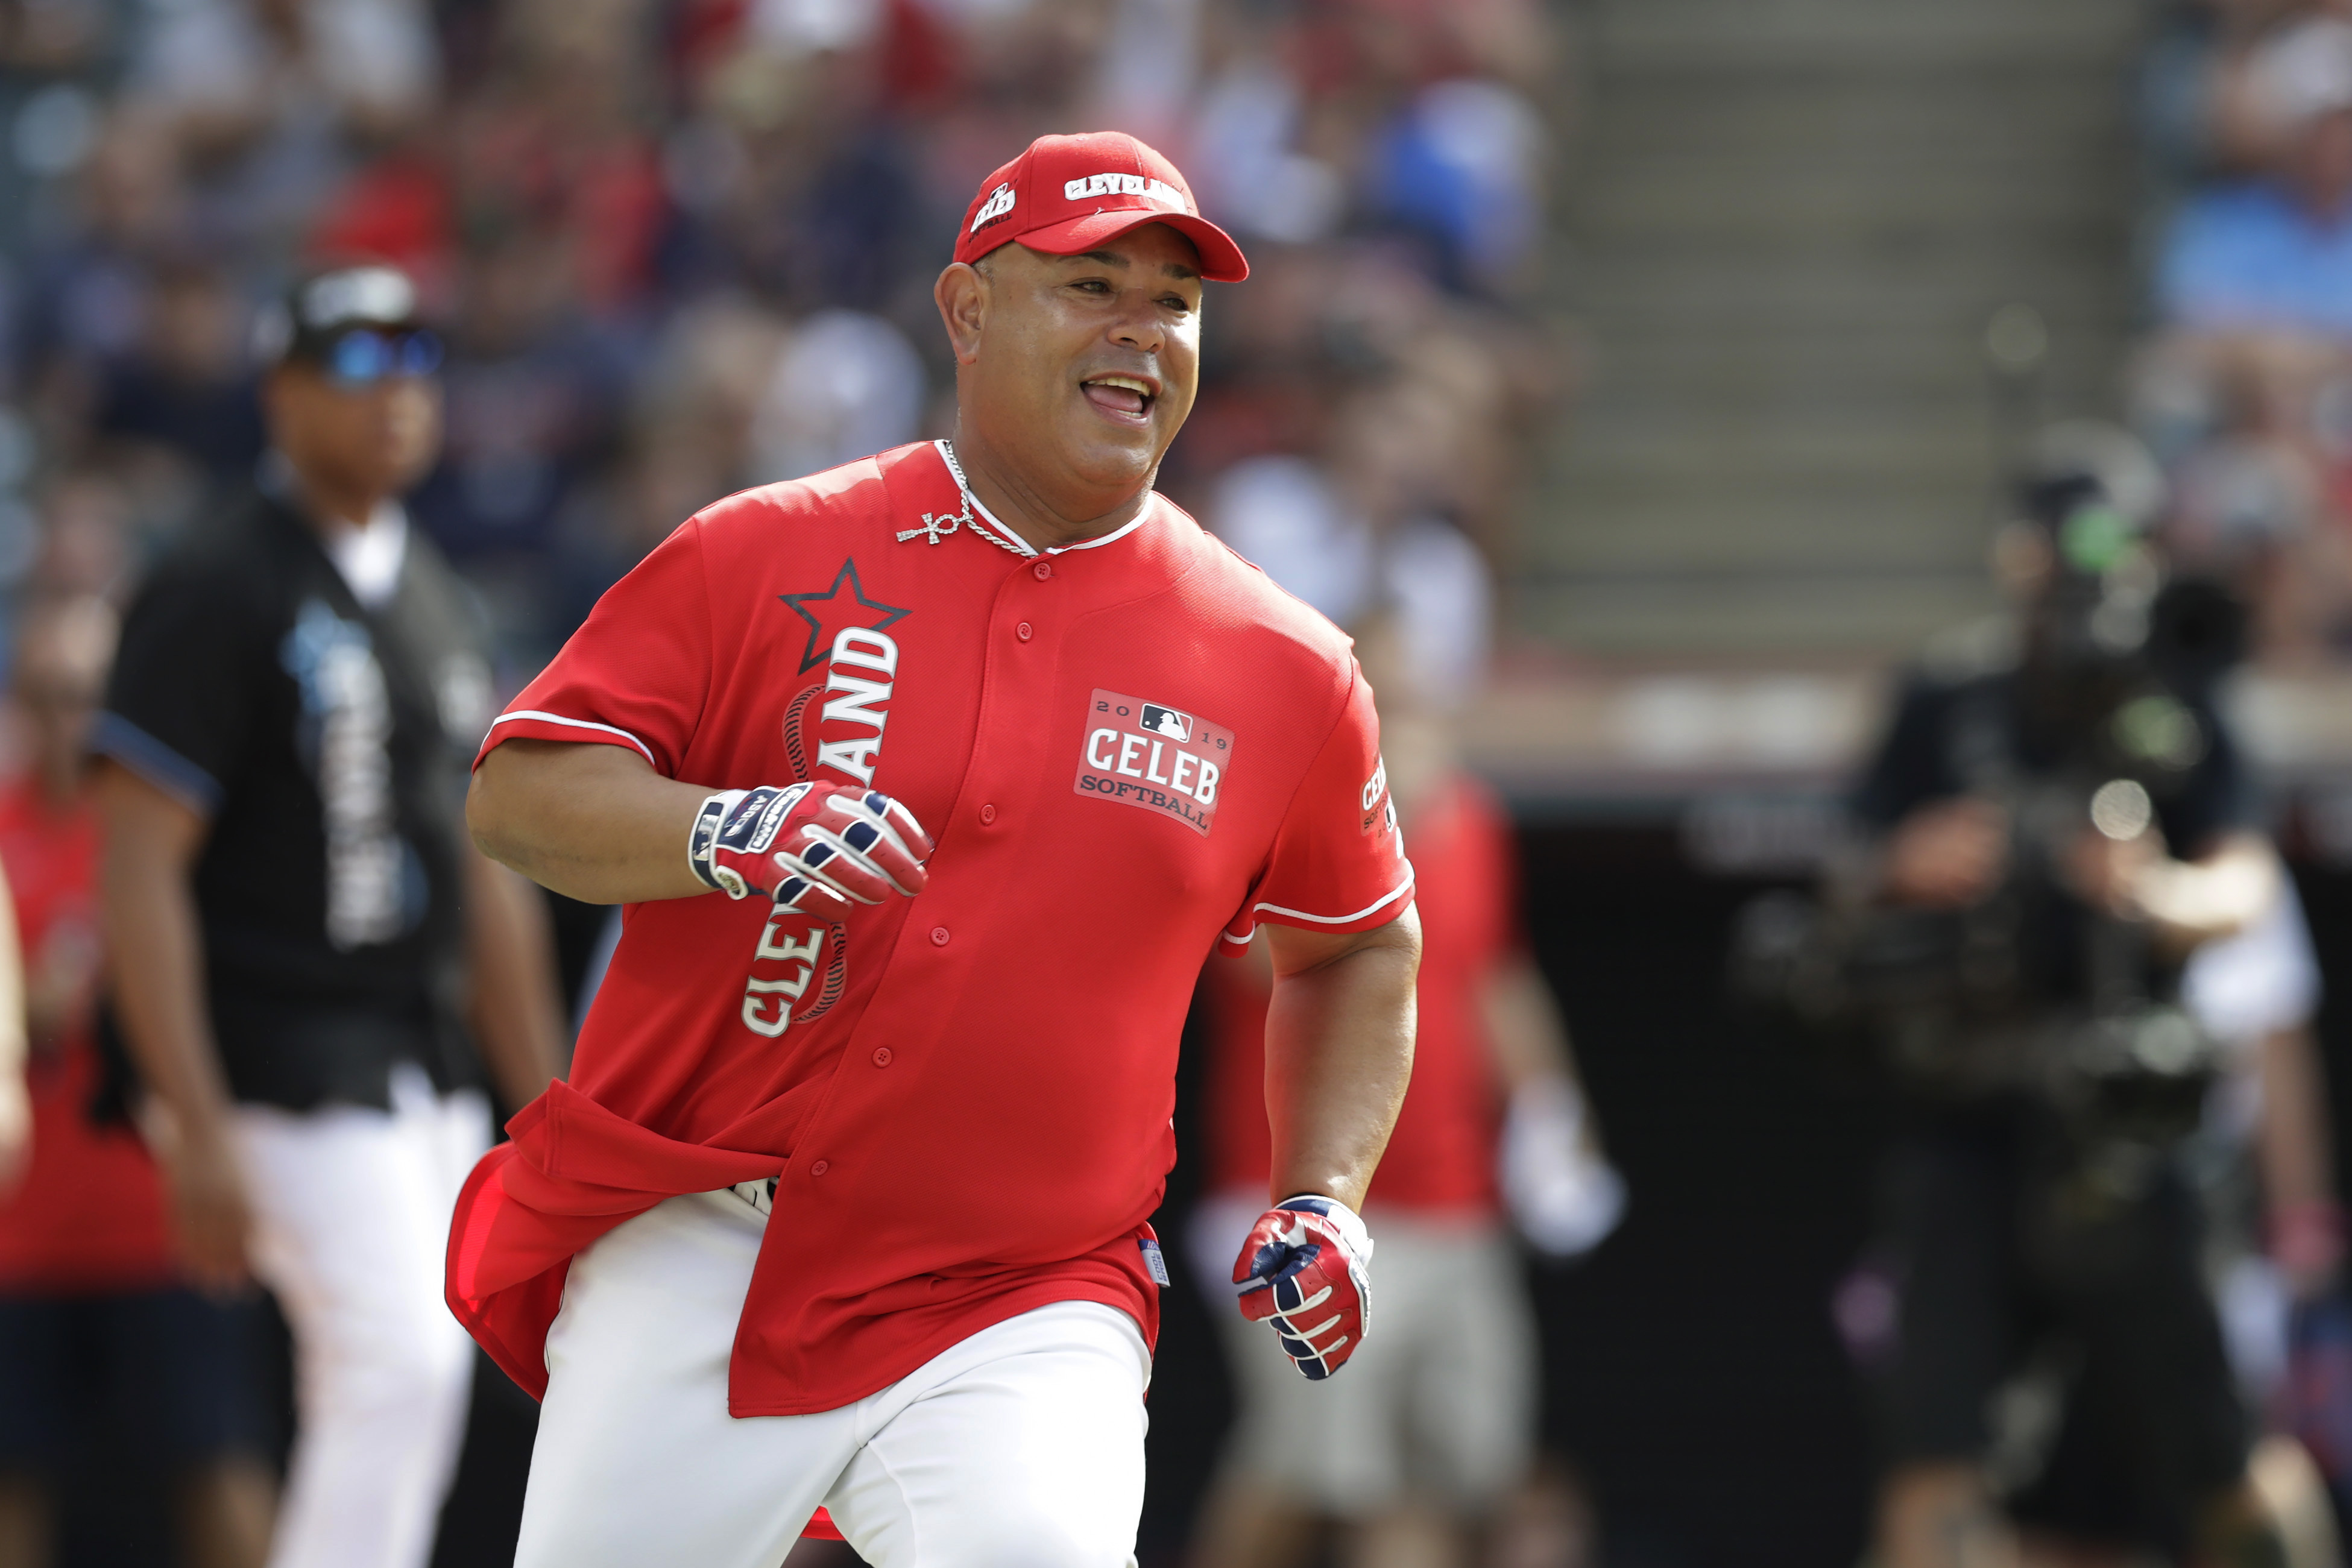 All-Star Celebrity Softball game rosters set, uniforms unveiled 